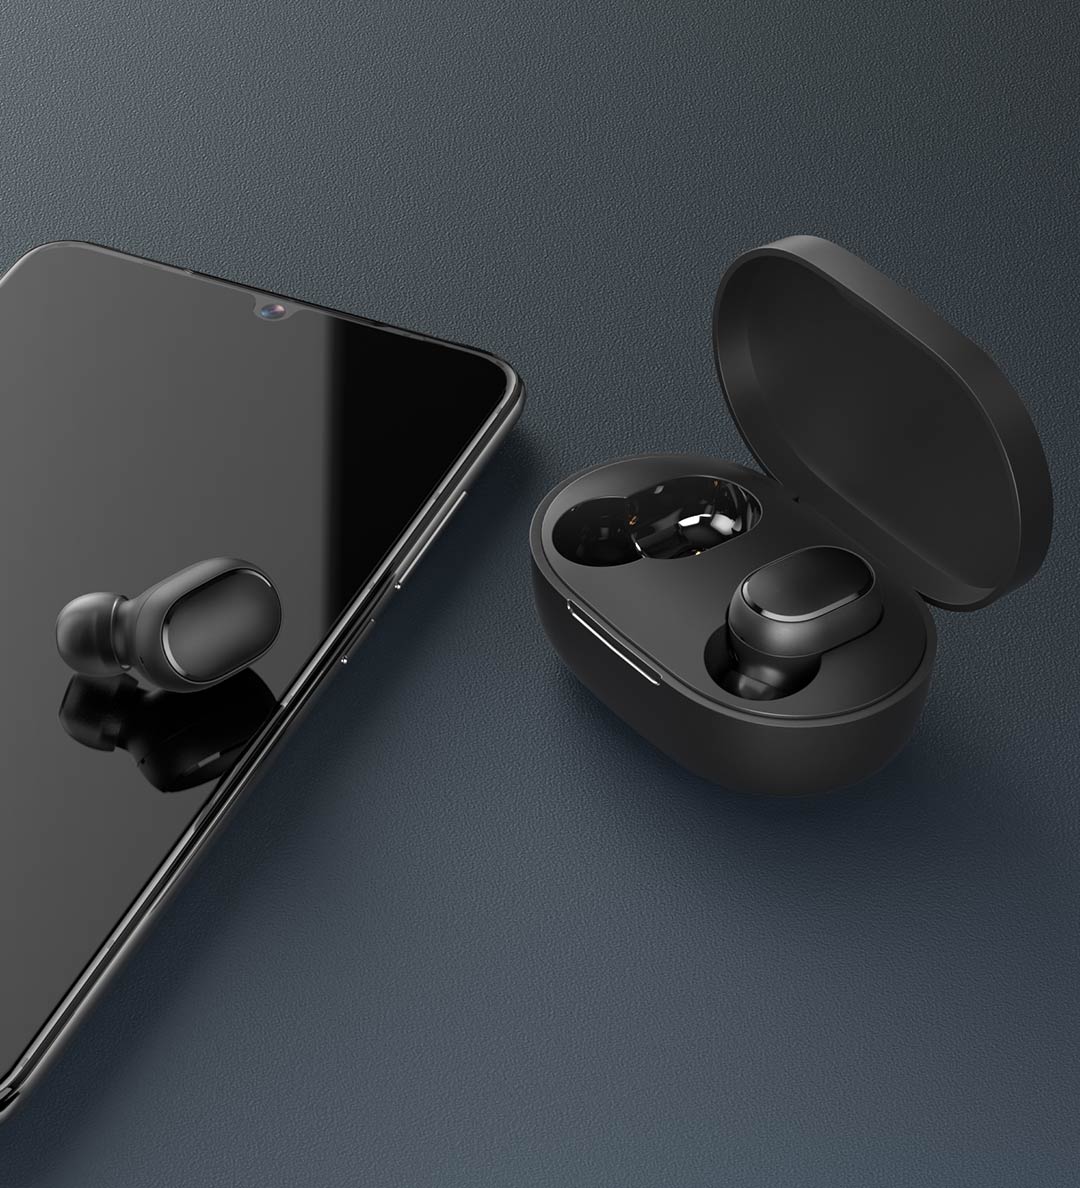 Redmi AirDots 2 TWS earphones announced in China for 79 yuan ($11 ...